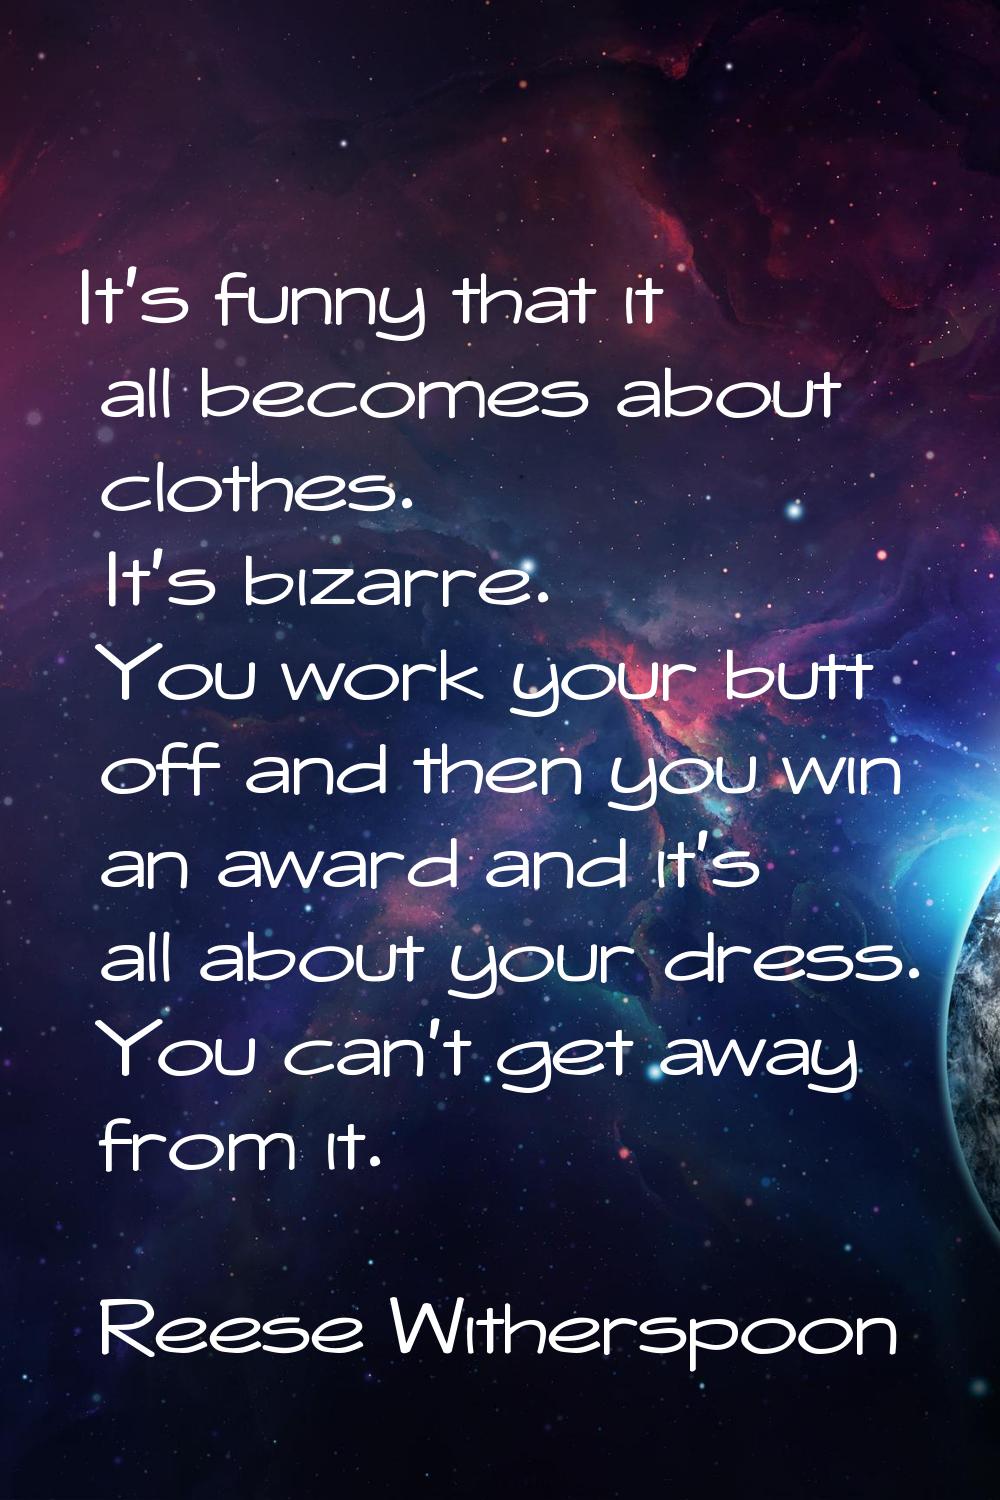 It's funny that it all becomes about clothes. It's bizarre. You work your butt off and then you win